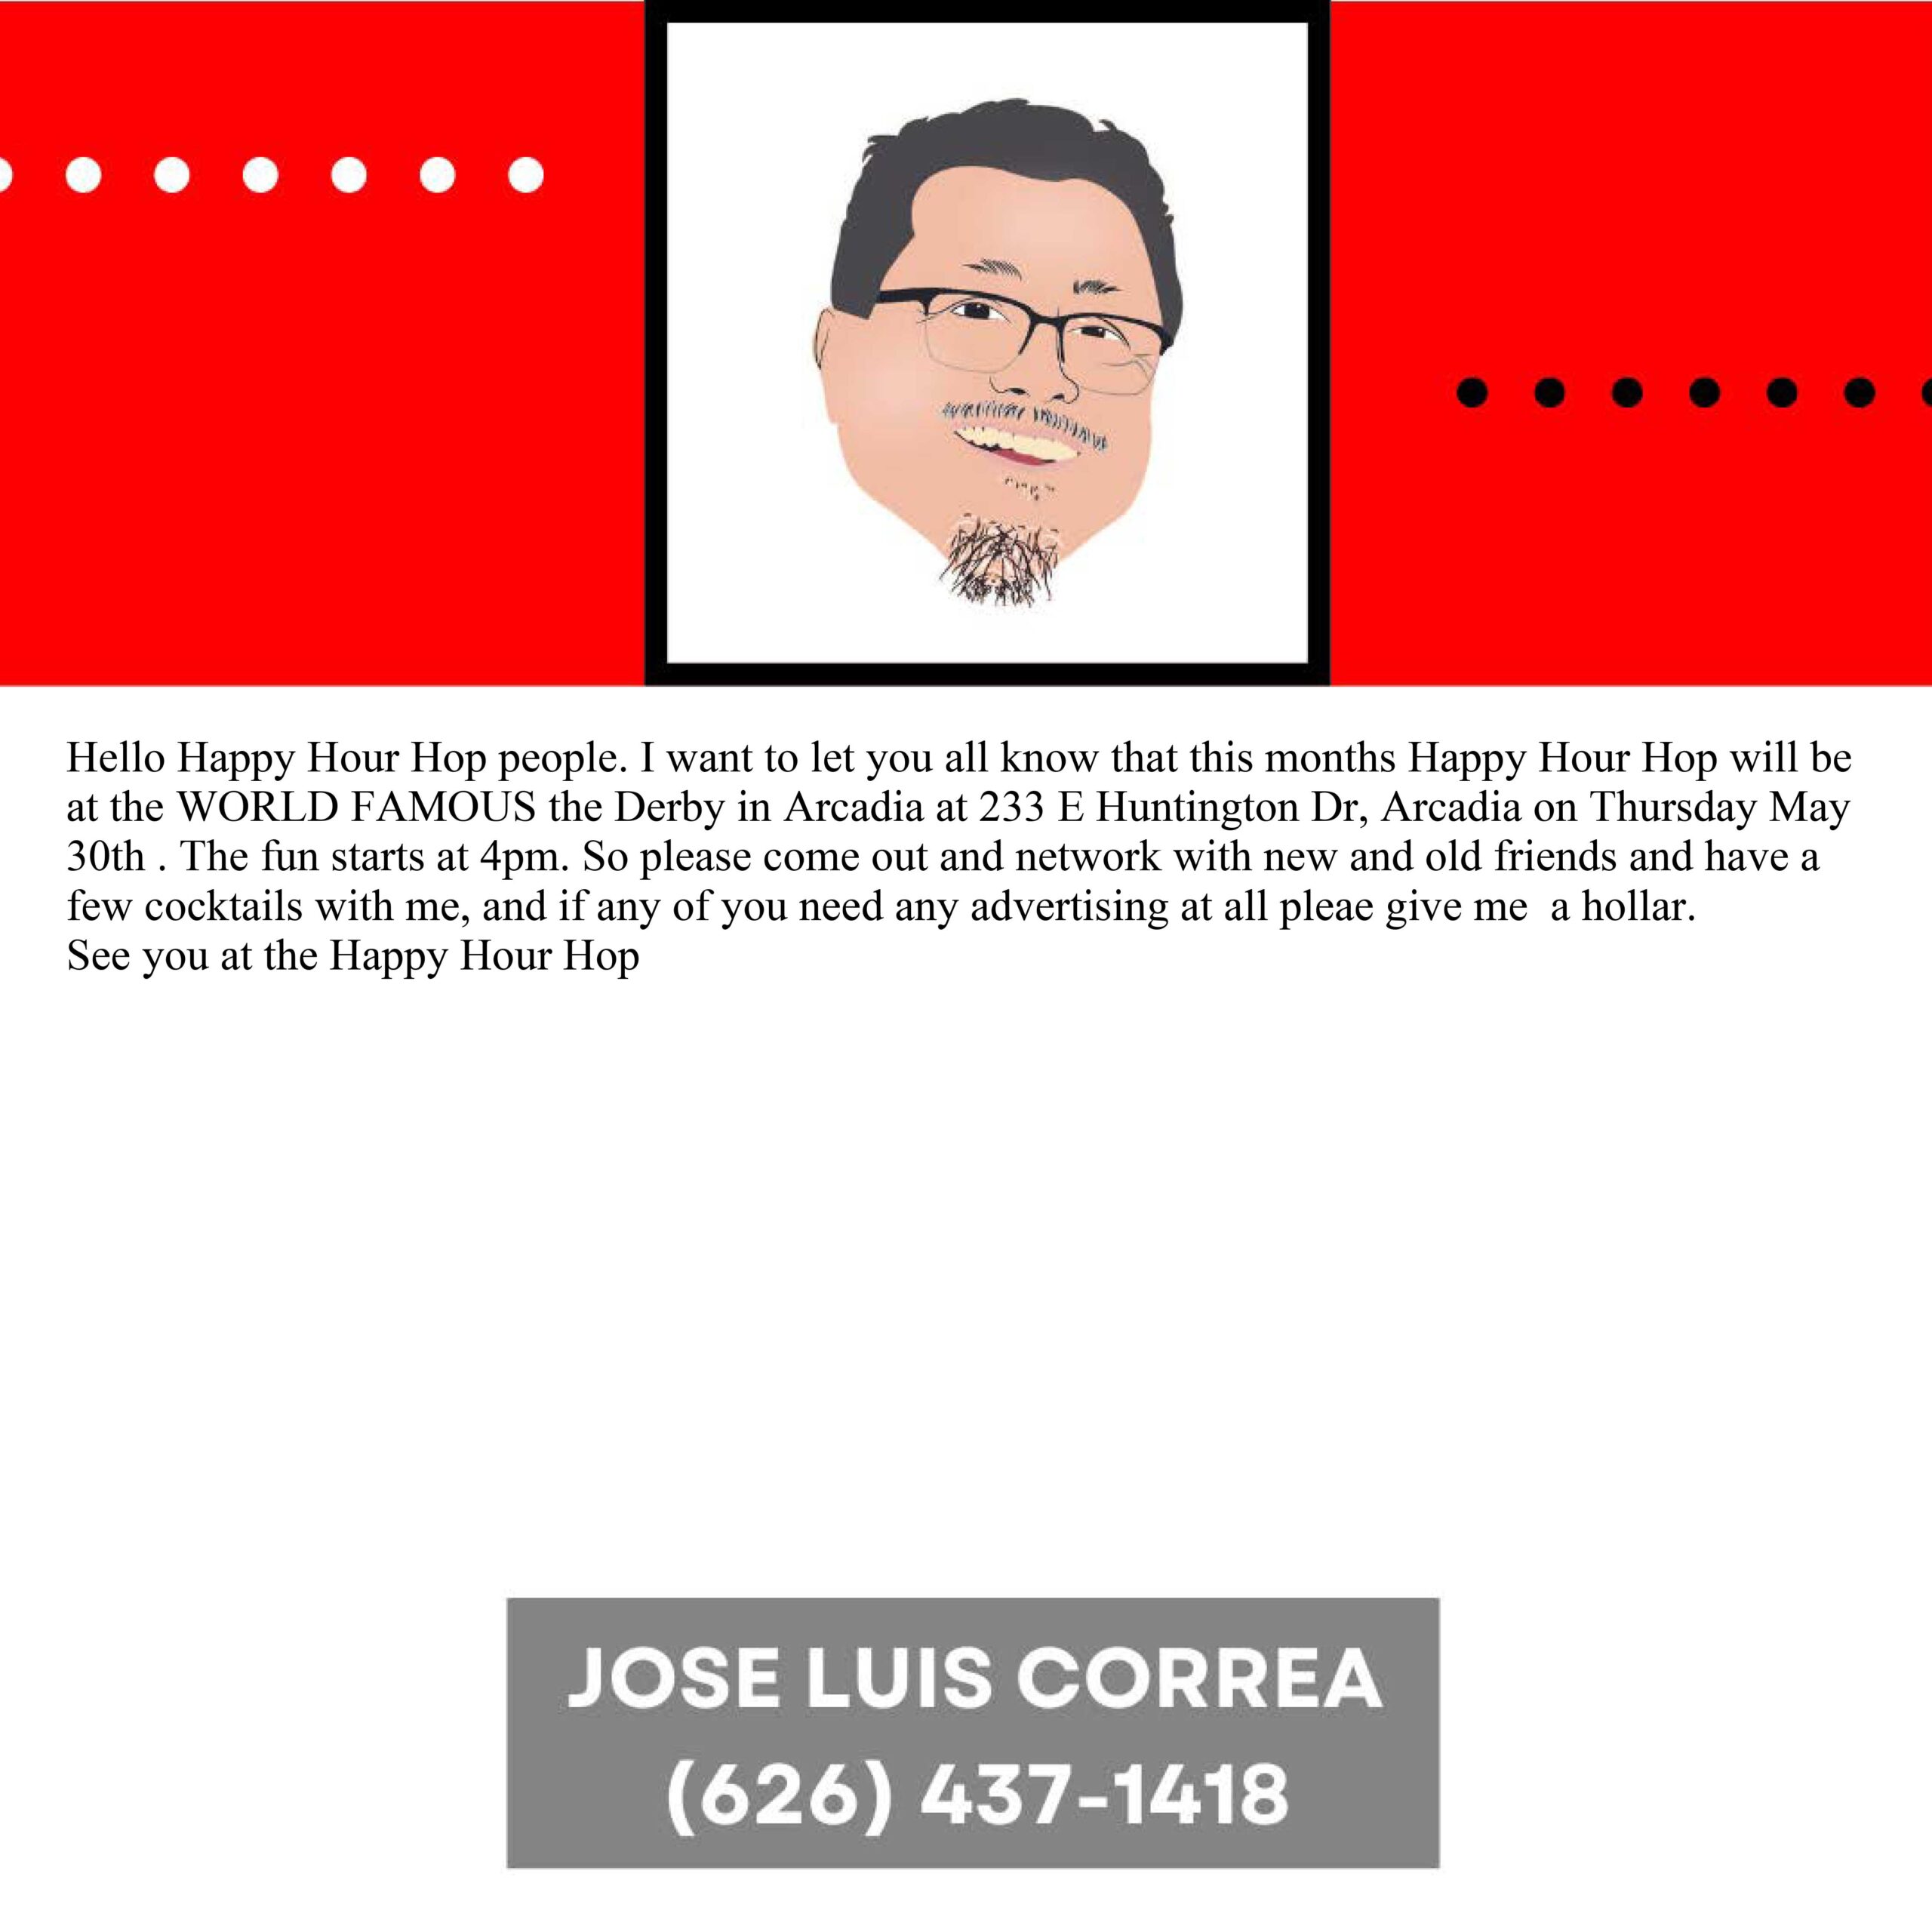 Jose Luis Correa ABC Group Happy Hour Hop information flyer for May 